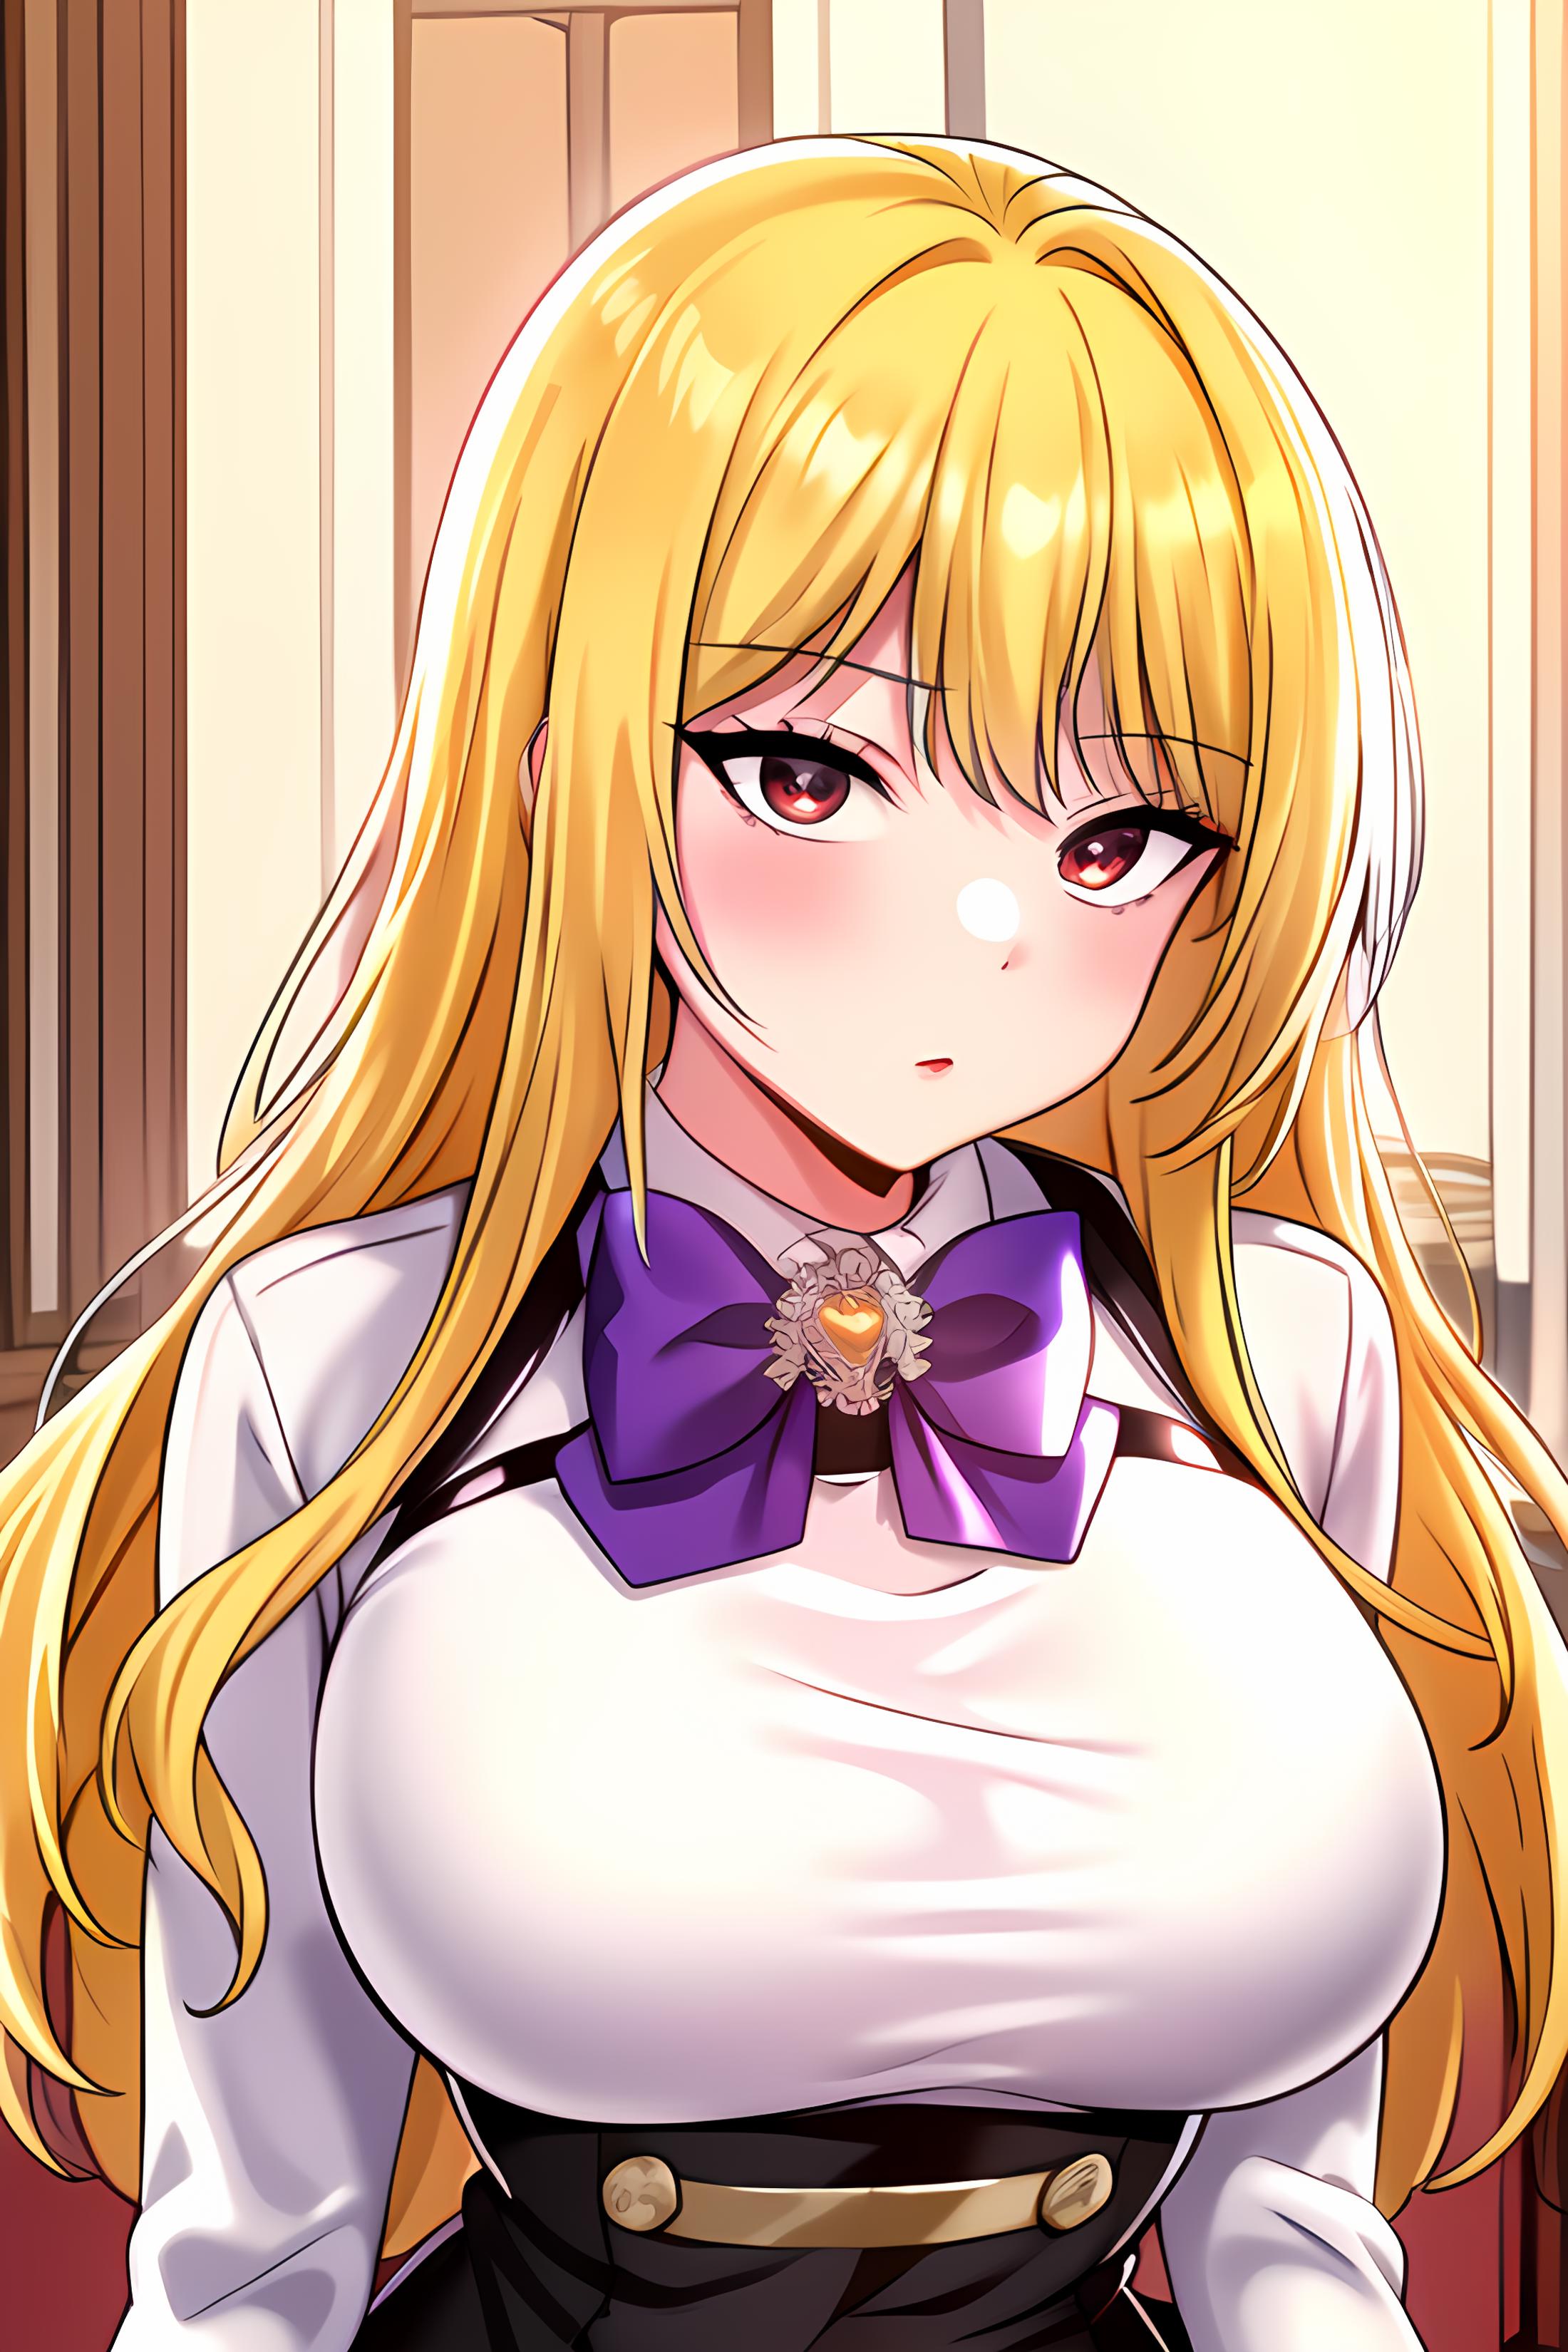 Alice (Trapped in the Academy’s Eroge) image by Nena